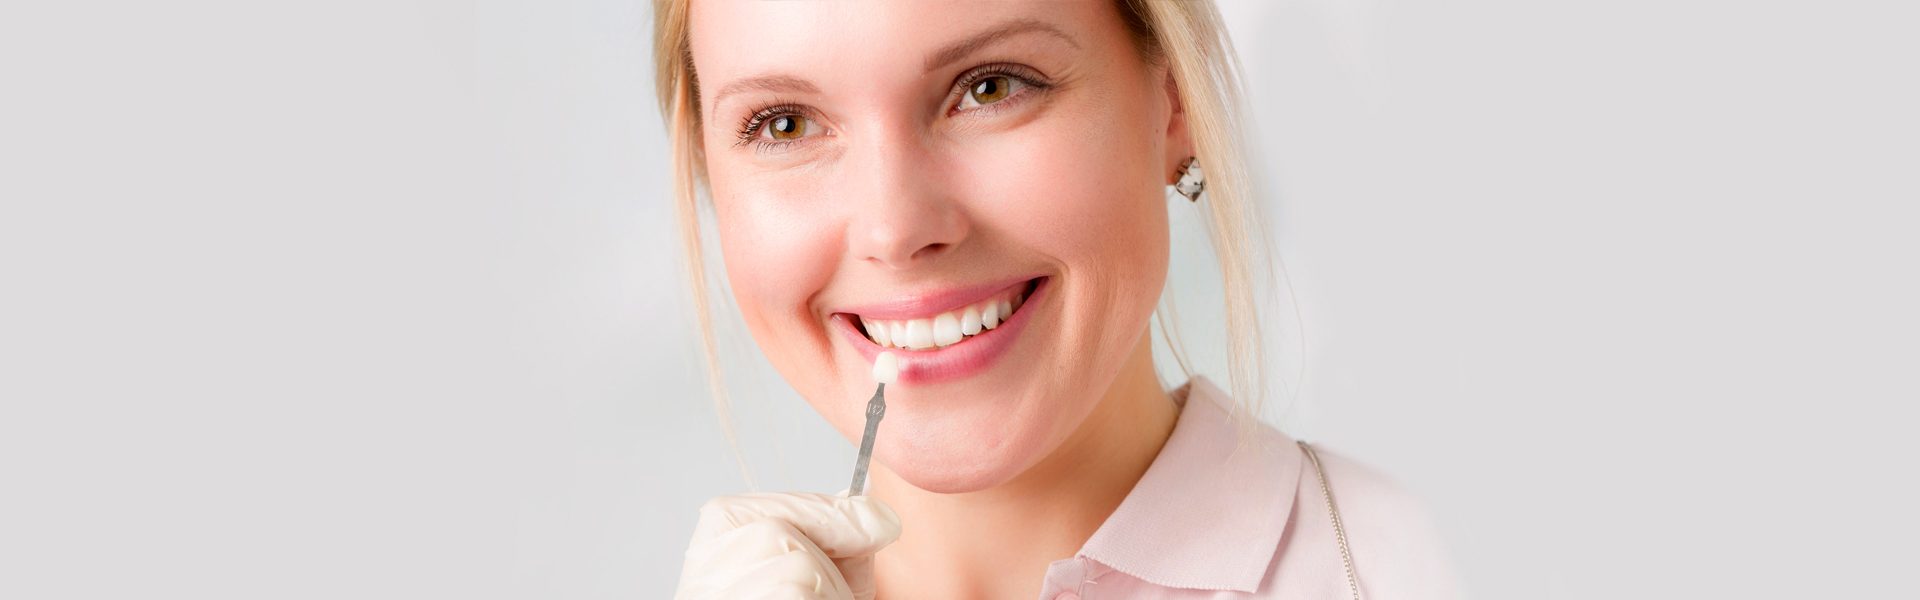 Valentine’s Day Approaching Fast: Why Not Enhance Your Smile Using Dental Veneers